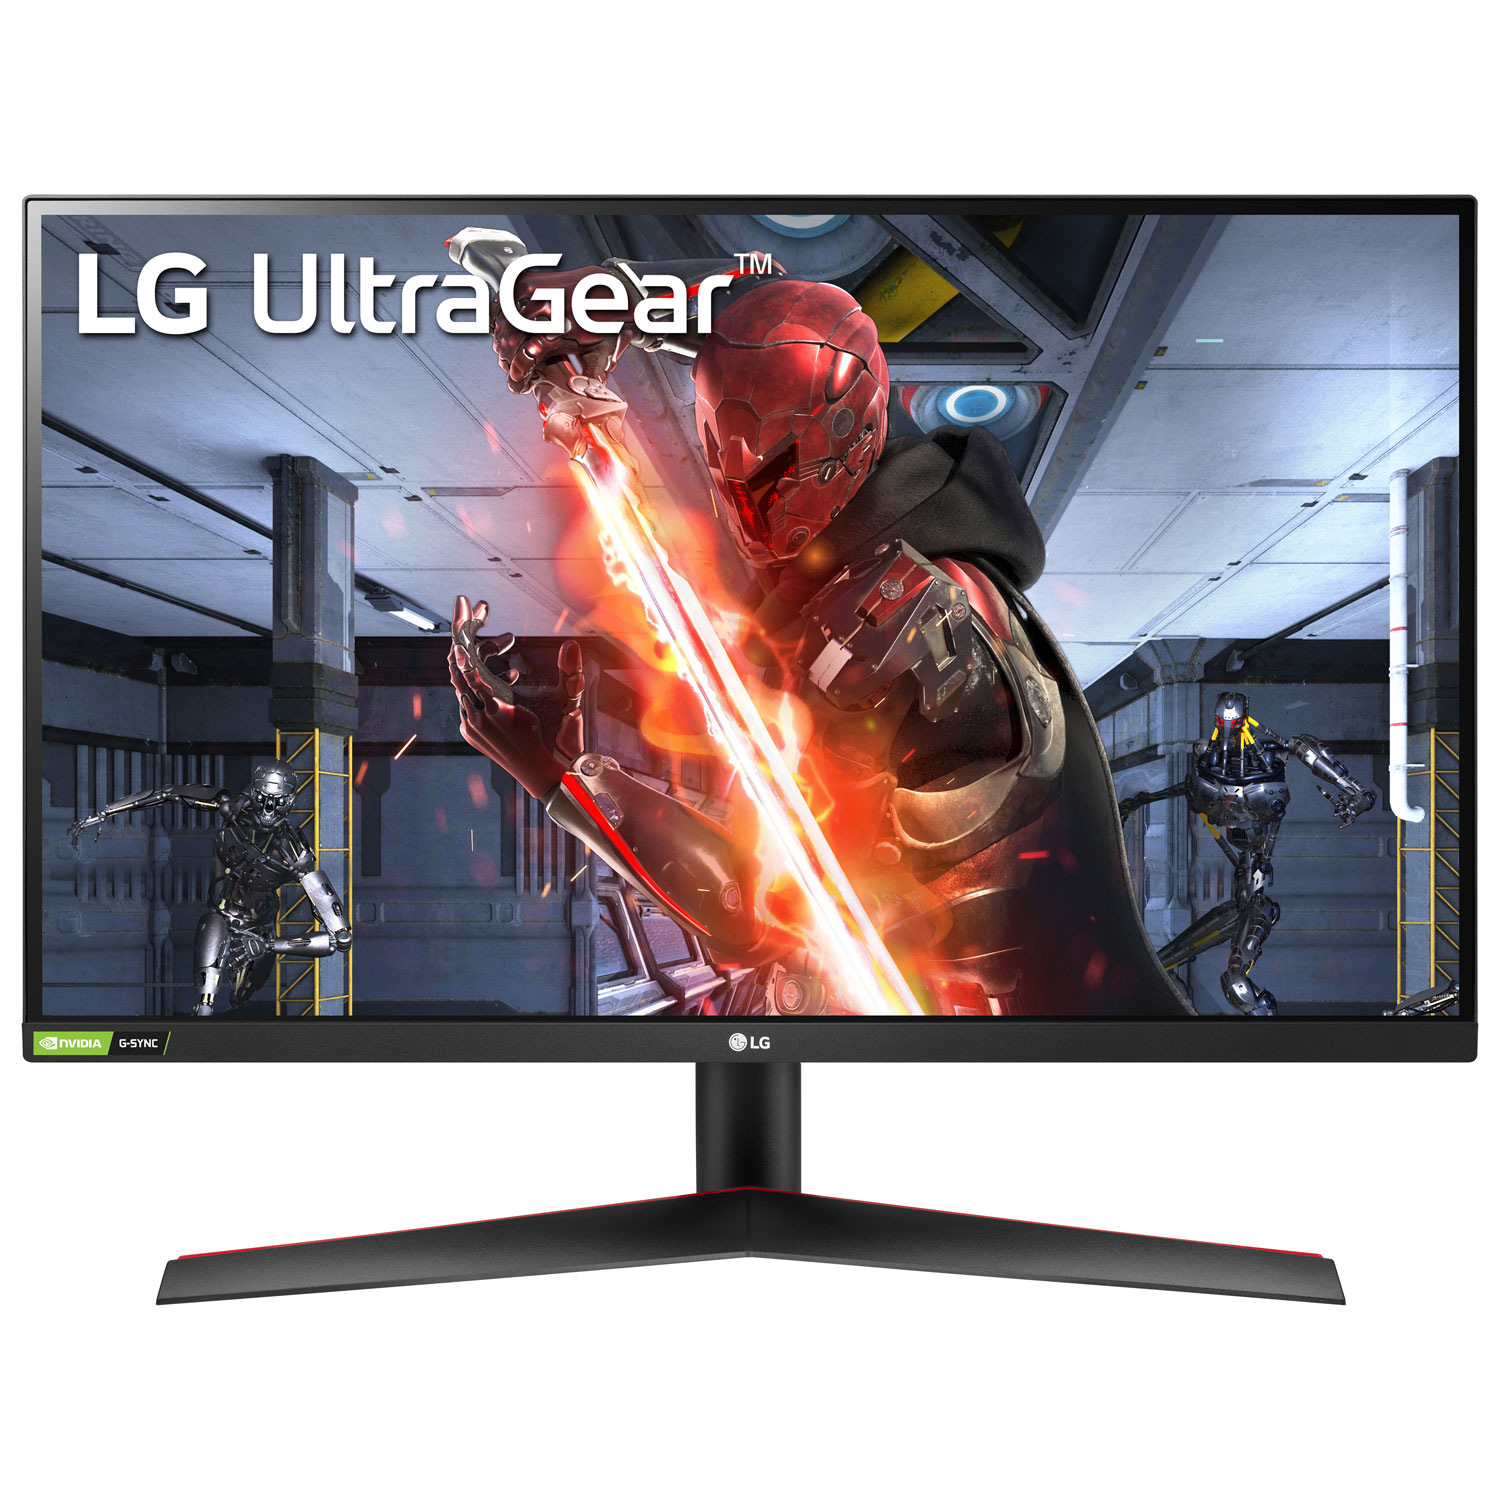 Lg Ultragear Monitor Ips Nvidia Where To Buy It At The Best Price In Canada